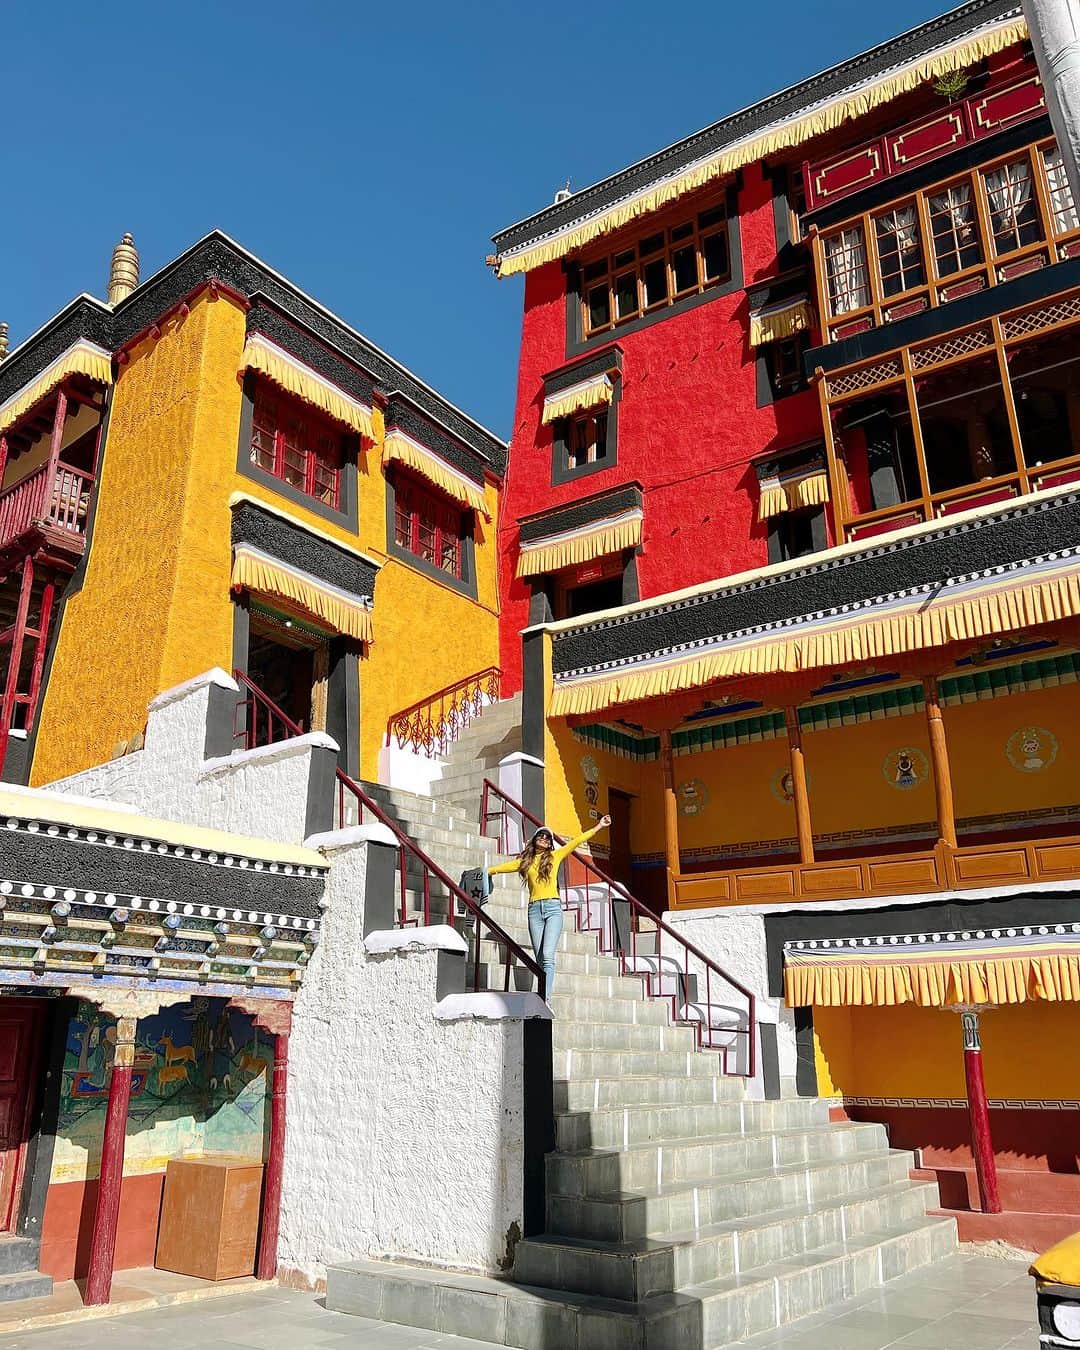 Aakriti Ranaのインスタグラム：「Thiksey Monastery is the largest monastery of Central Ladakh, the monastery is also famous for its 49 ft tall statue of Maitreya Buddha in the lotus position, covering two floors of the monastery. Isn’t it so beautiful?   #DefenderJourneys @landrover_in @Cougar__Motorsport #CougarMotorsport #partnership #aakritirana #leh #ladakh #thikseymonastery #travelblogger #incredibleindia」